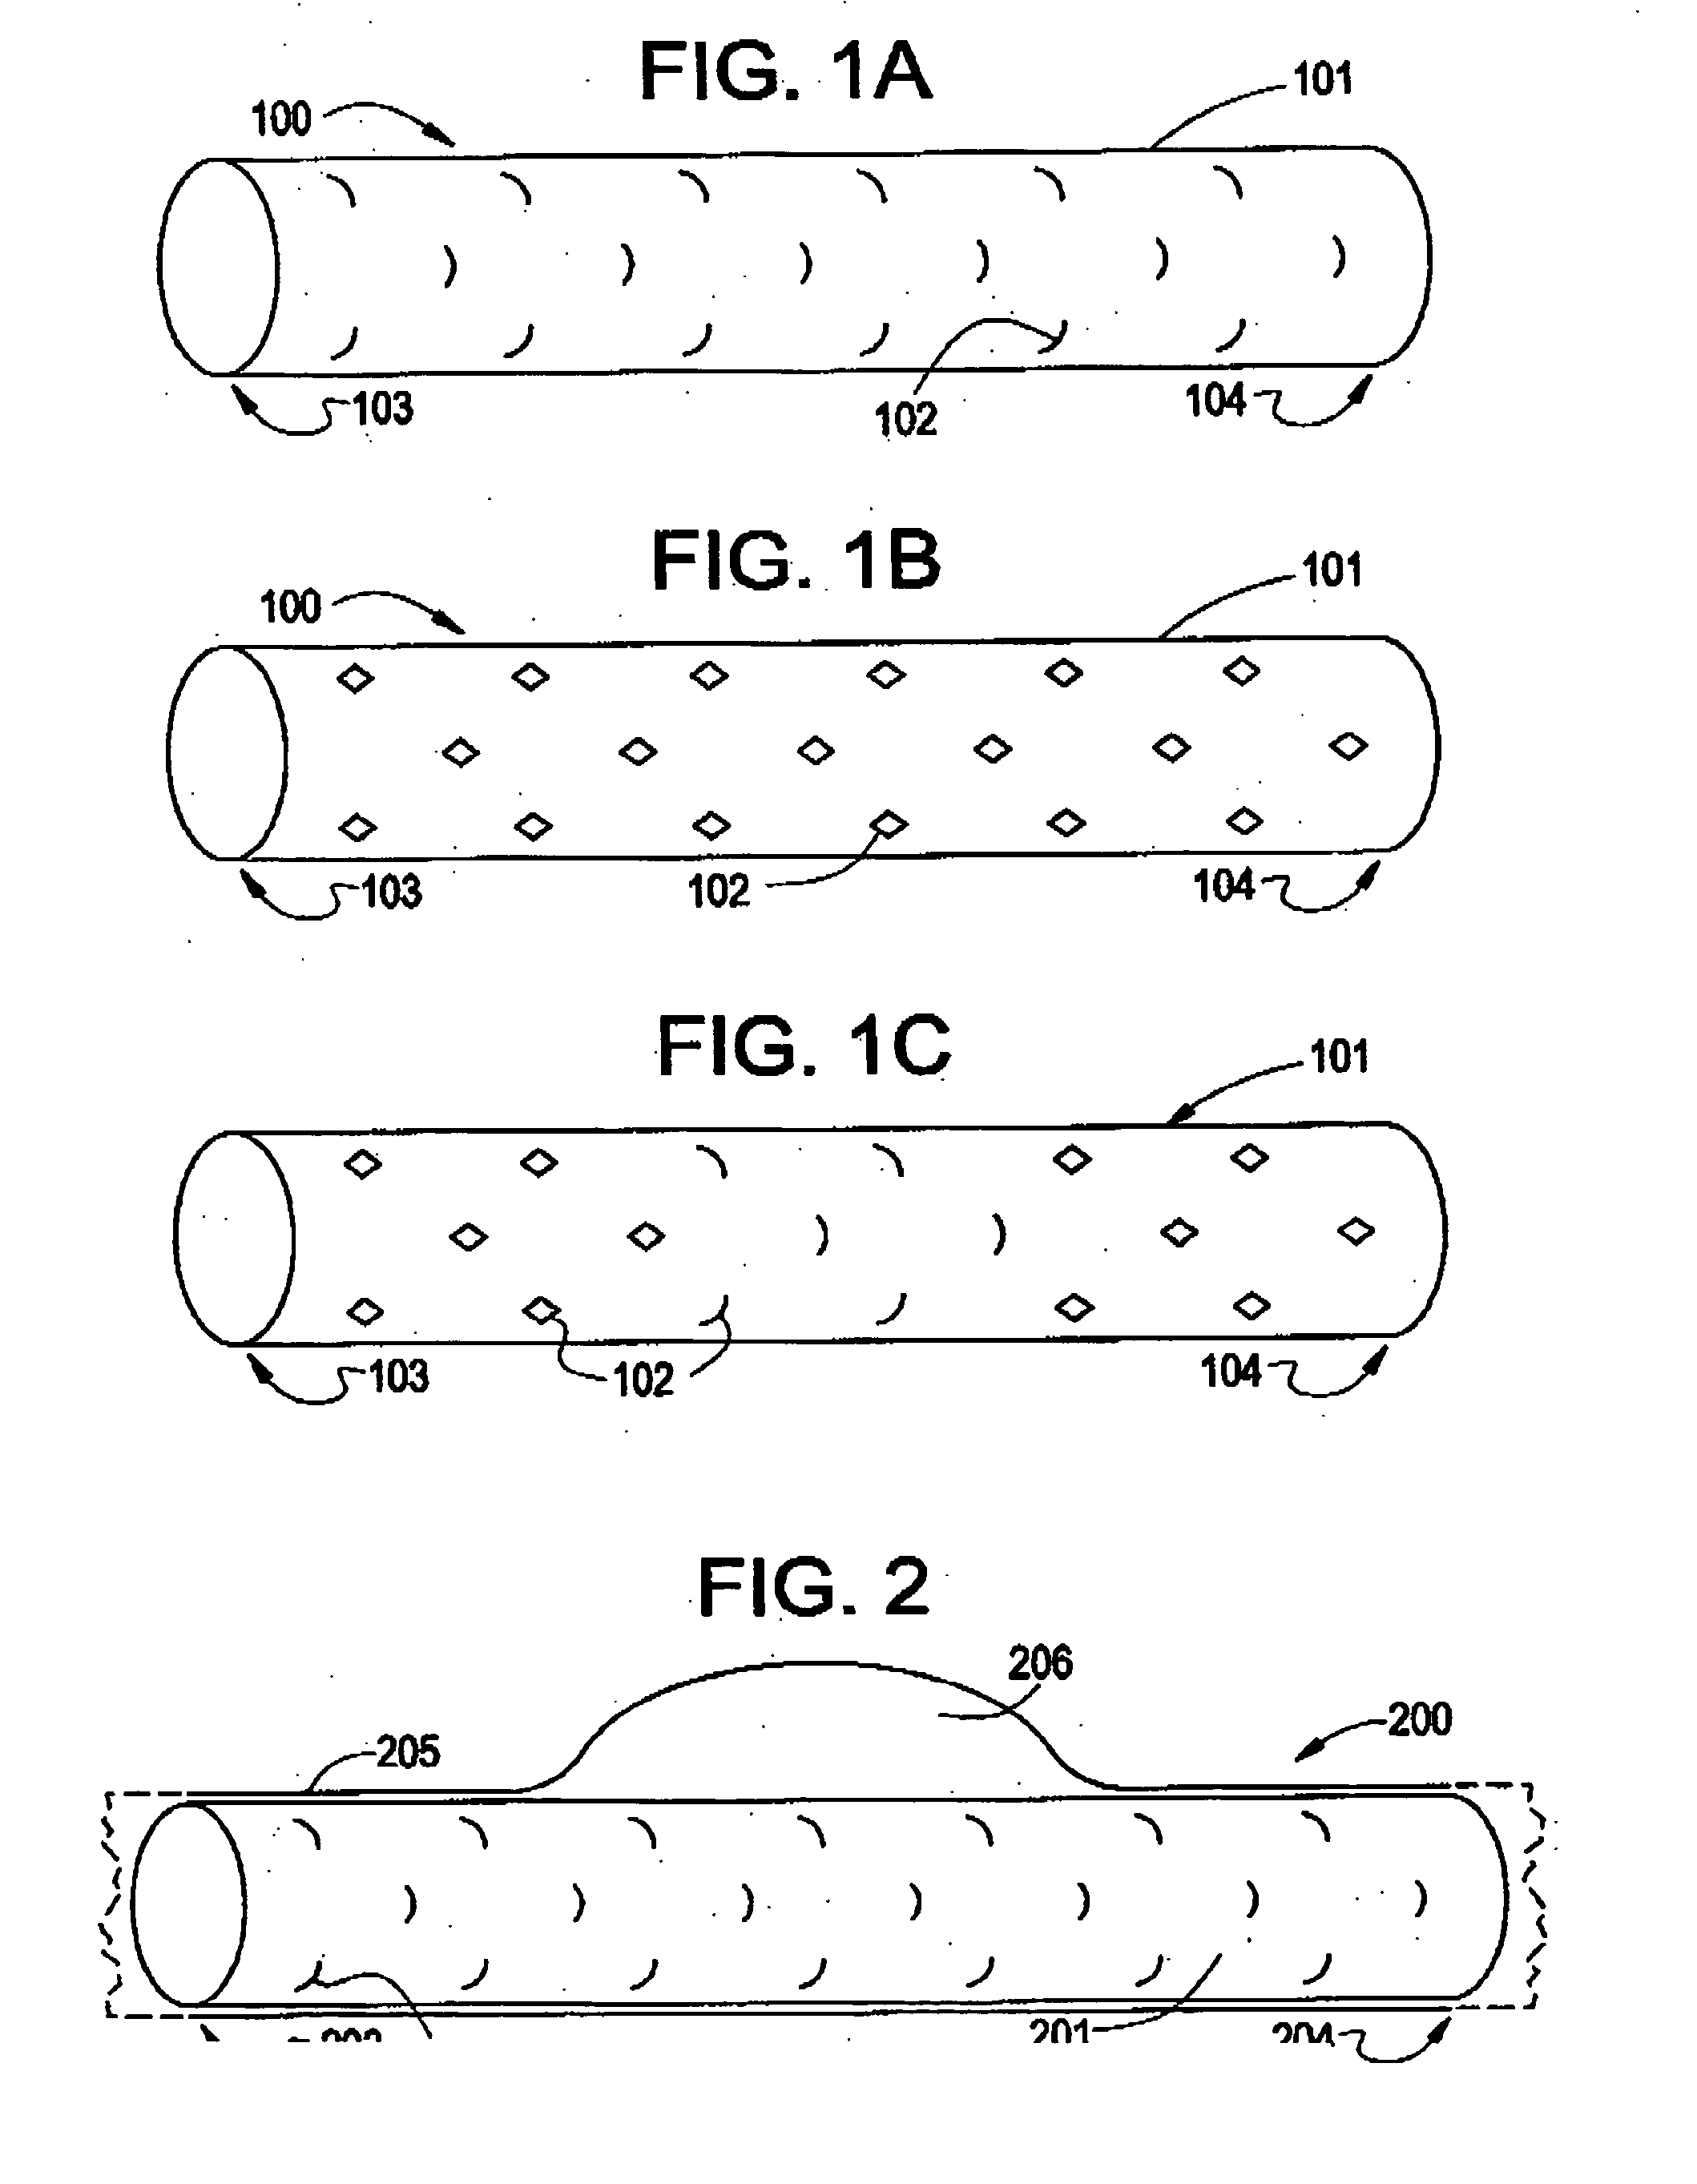 Thin film medical device and delivery system